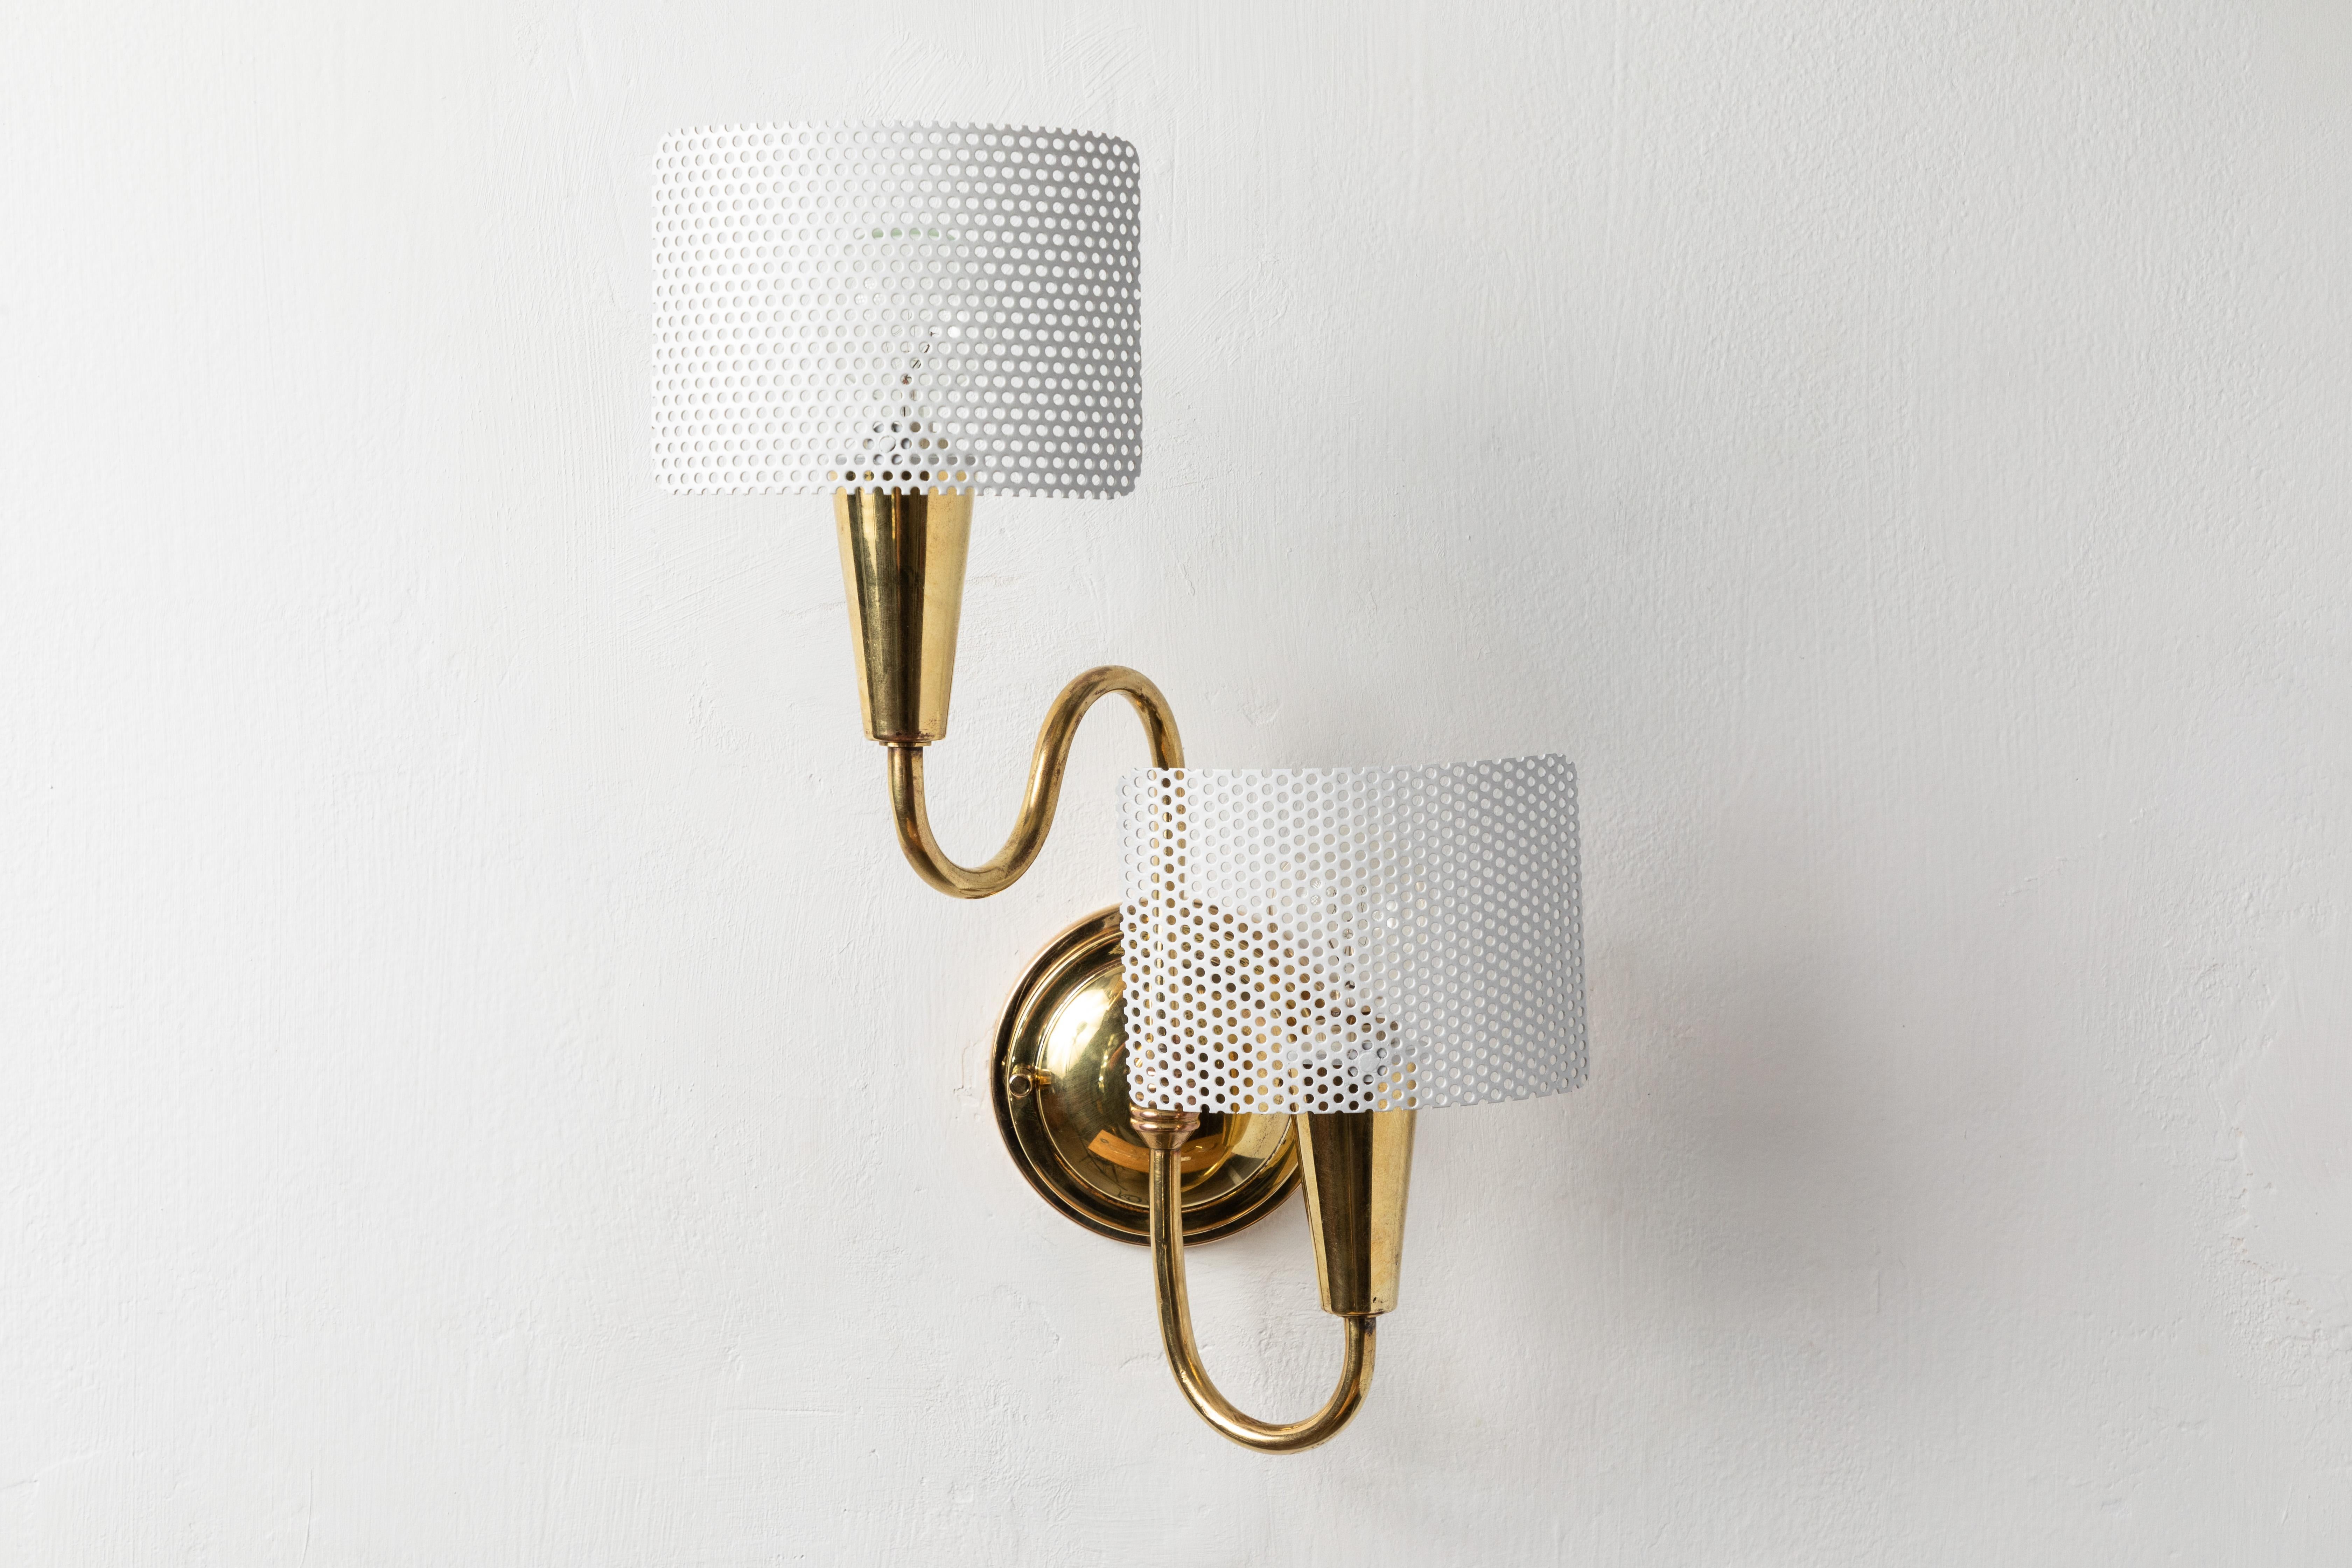 Pair of 1950s French Sculptural Sconces in the style of Mathieu Matégot. Executed in white painted perforated metal and tubular brass. These double shaded sconces embody the more lyrical and warm side of midcentury French design, as exemplified by